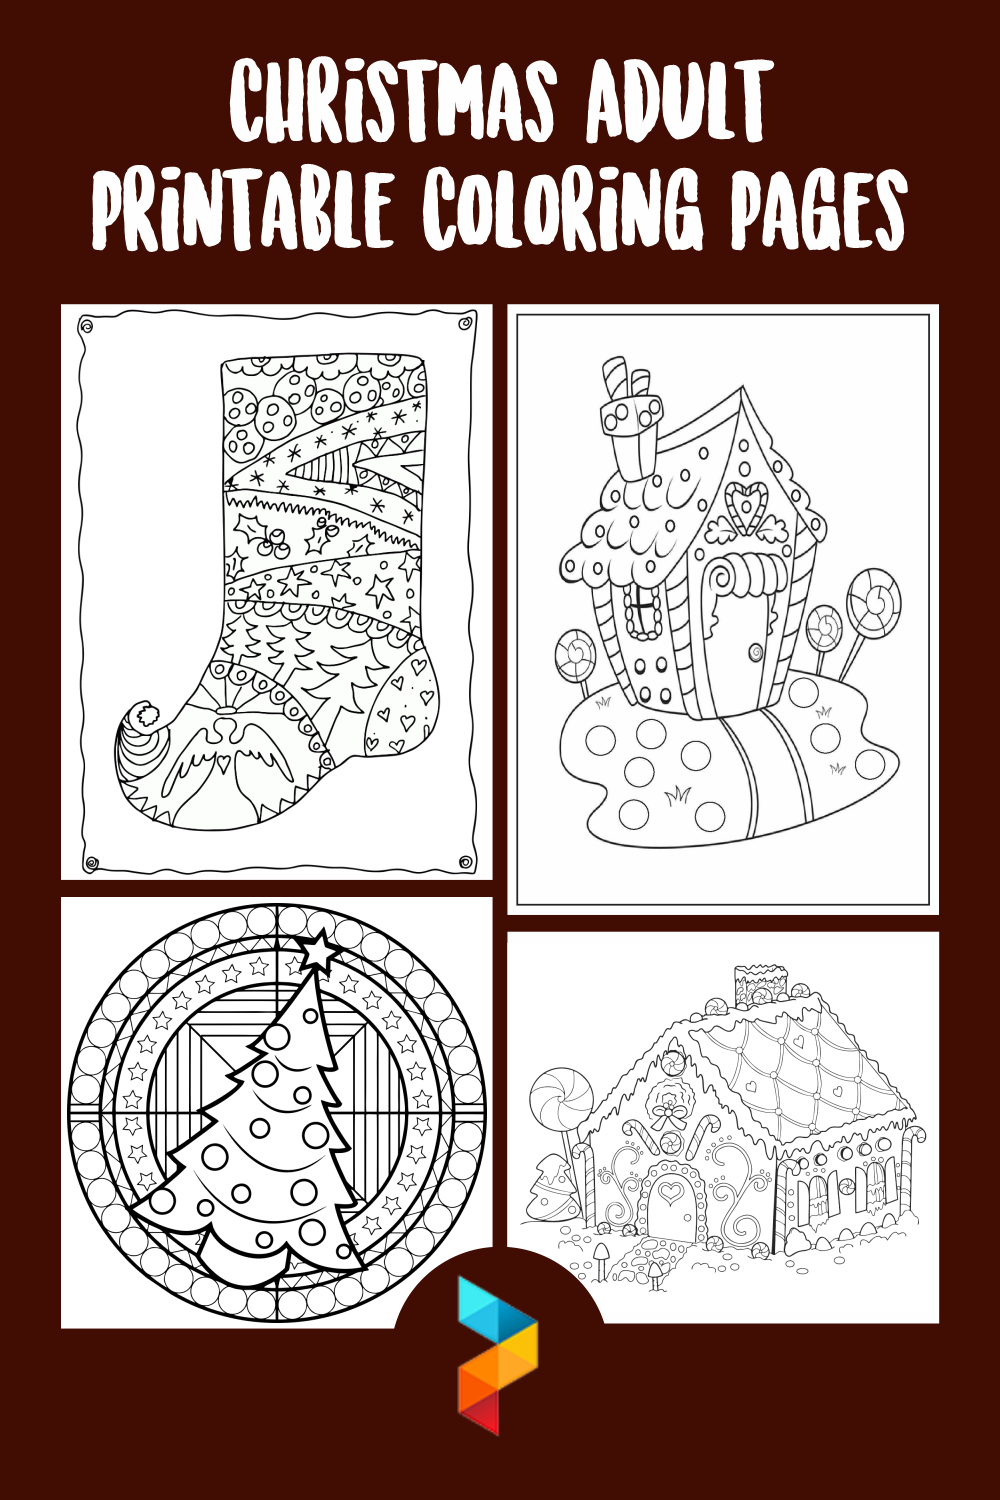 Christmas Adult Printable Coloring Pages